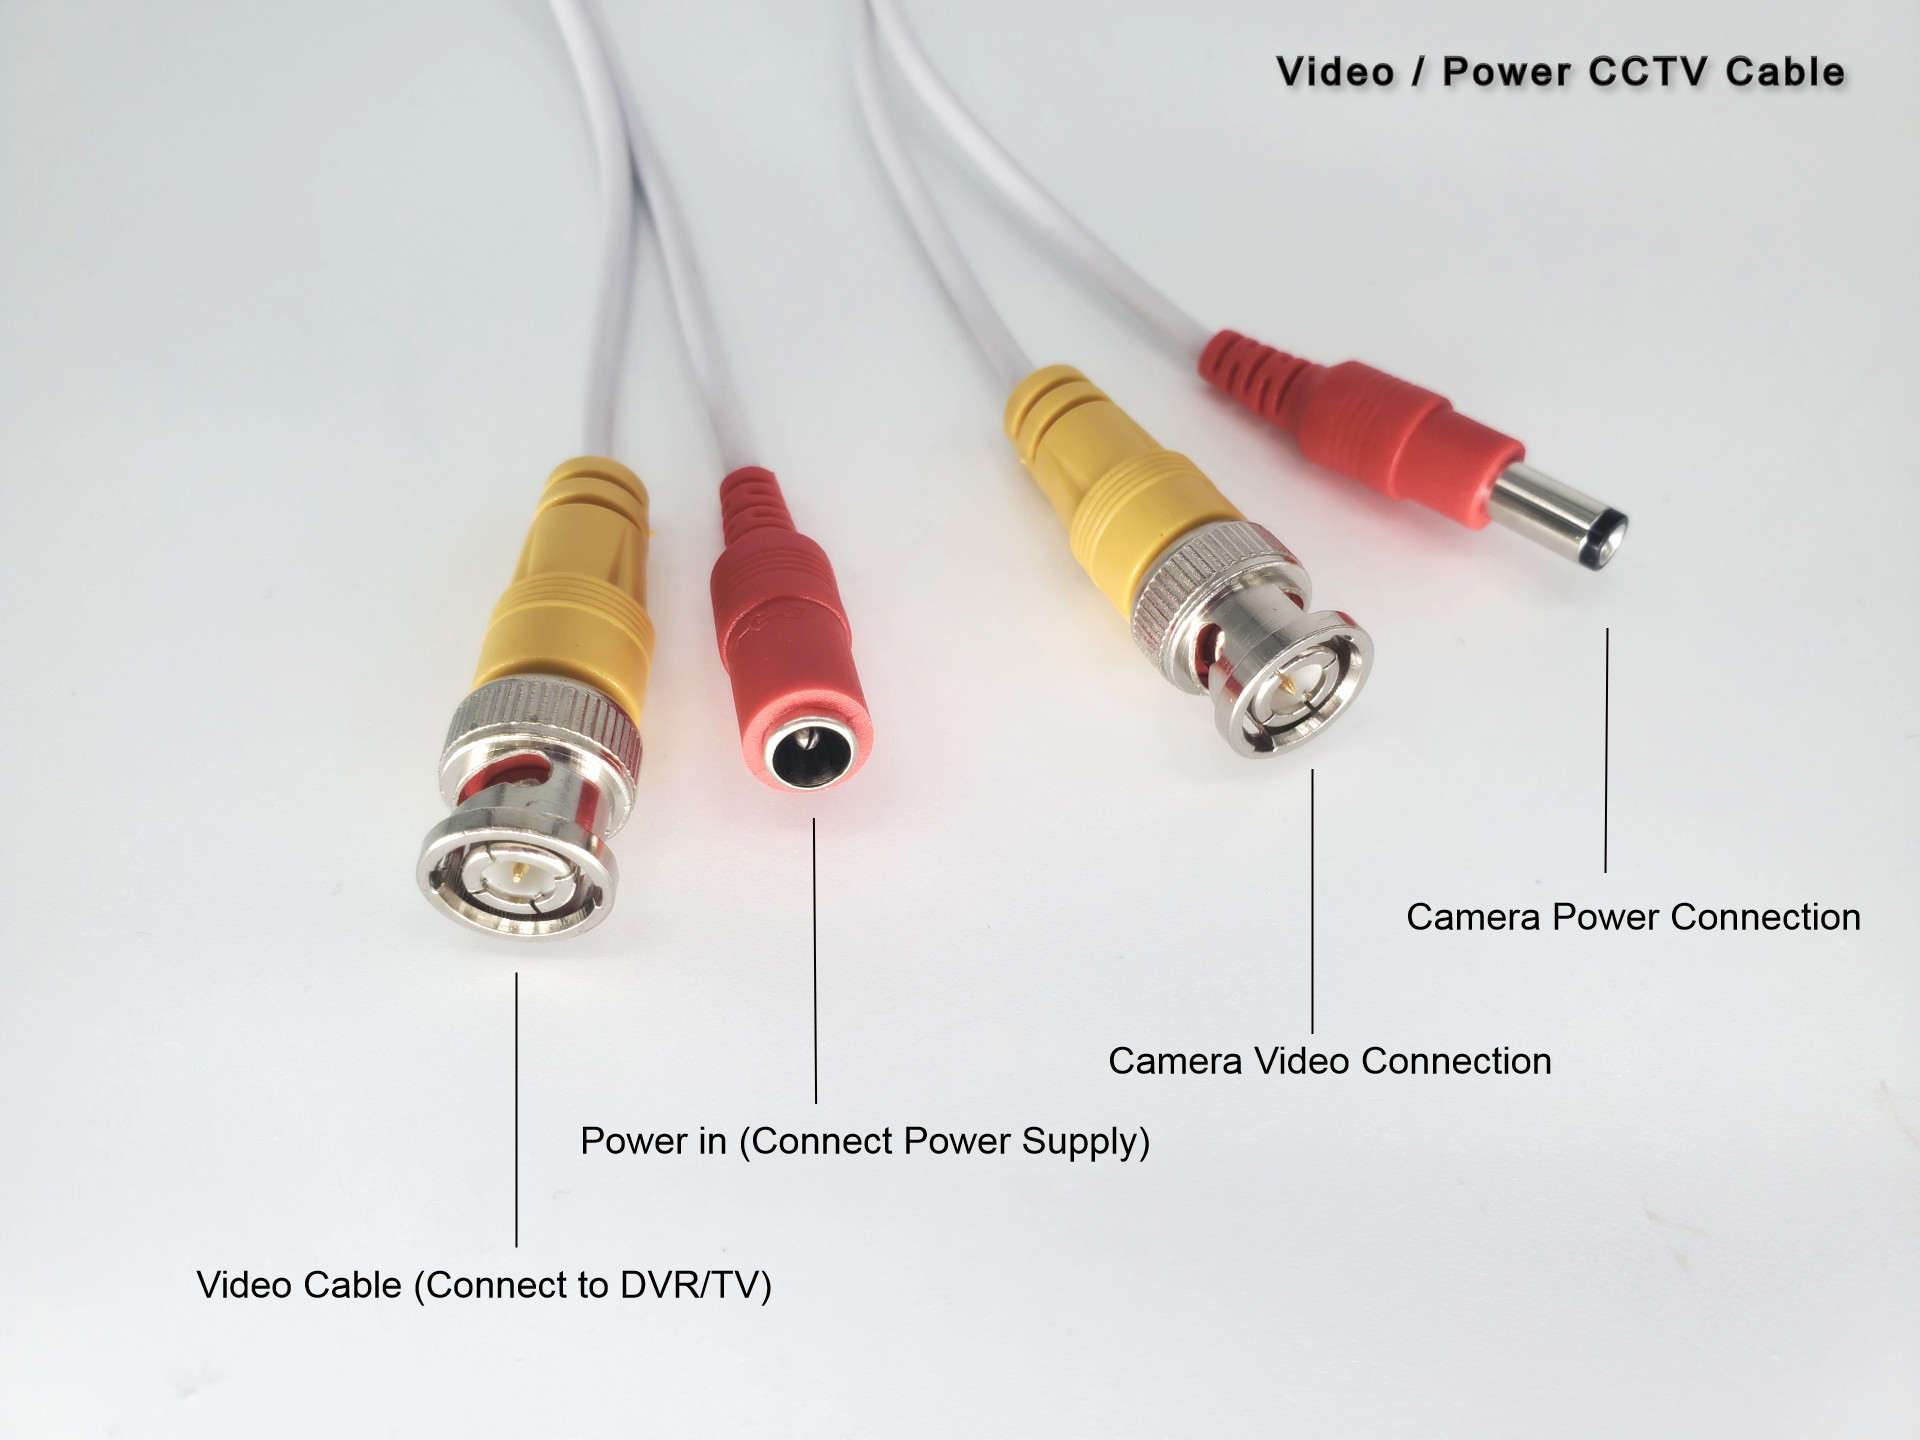 Evertech 2 Pcs 100 Feet Power & Video Pre-Made CCTV BNC Cable for Security Camera with 2 female connectors - image 2 of 6